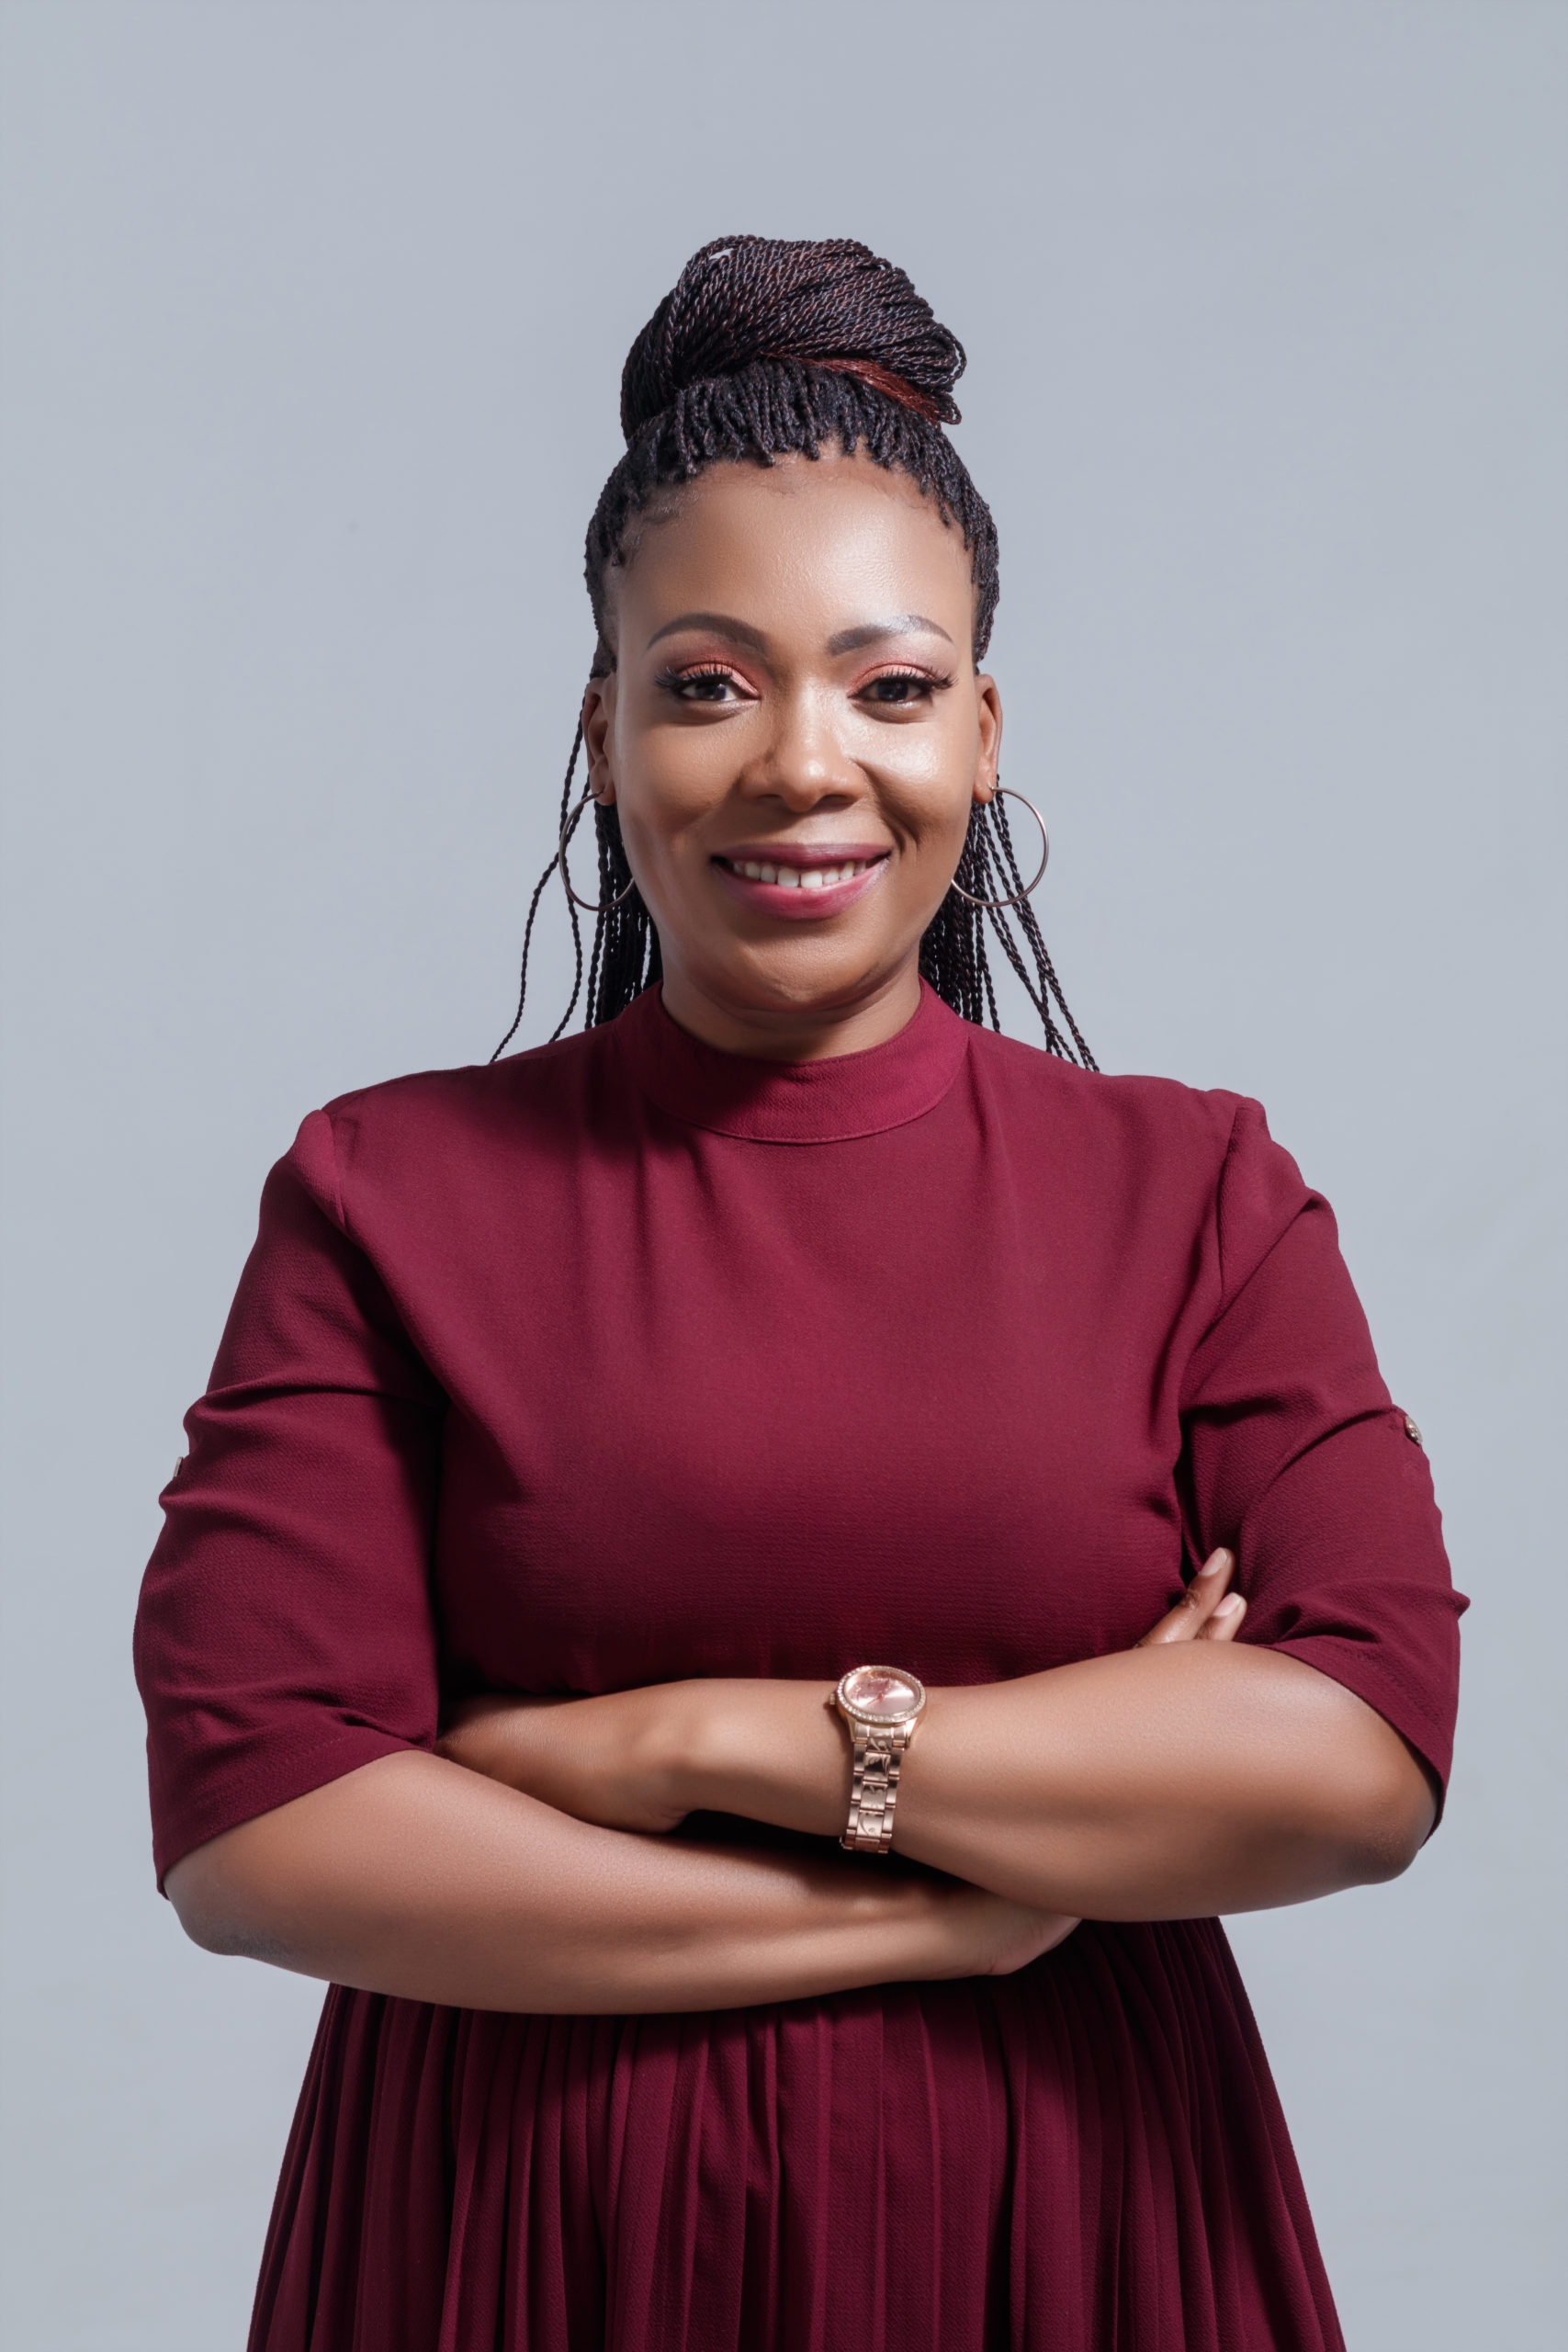 Sindi Dlamini – Founder and CEO of Women of Crazy Wealth